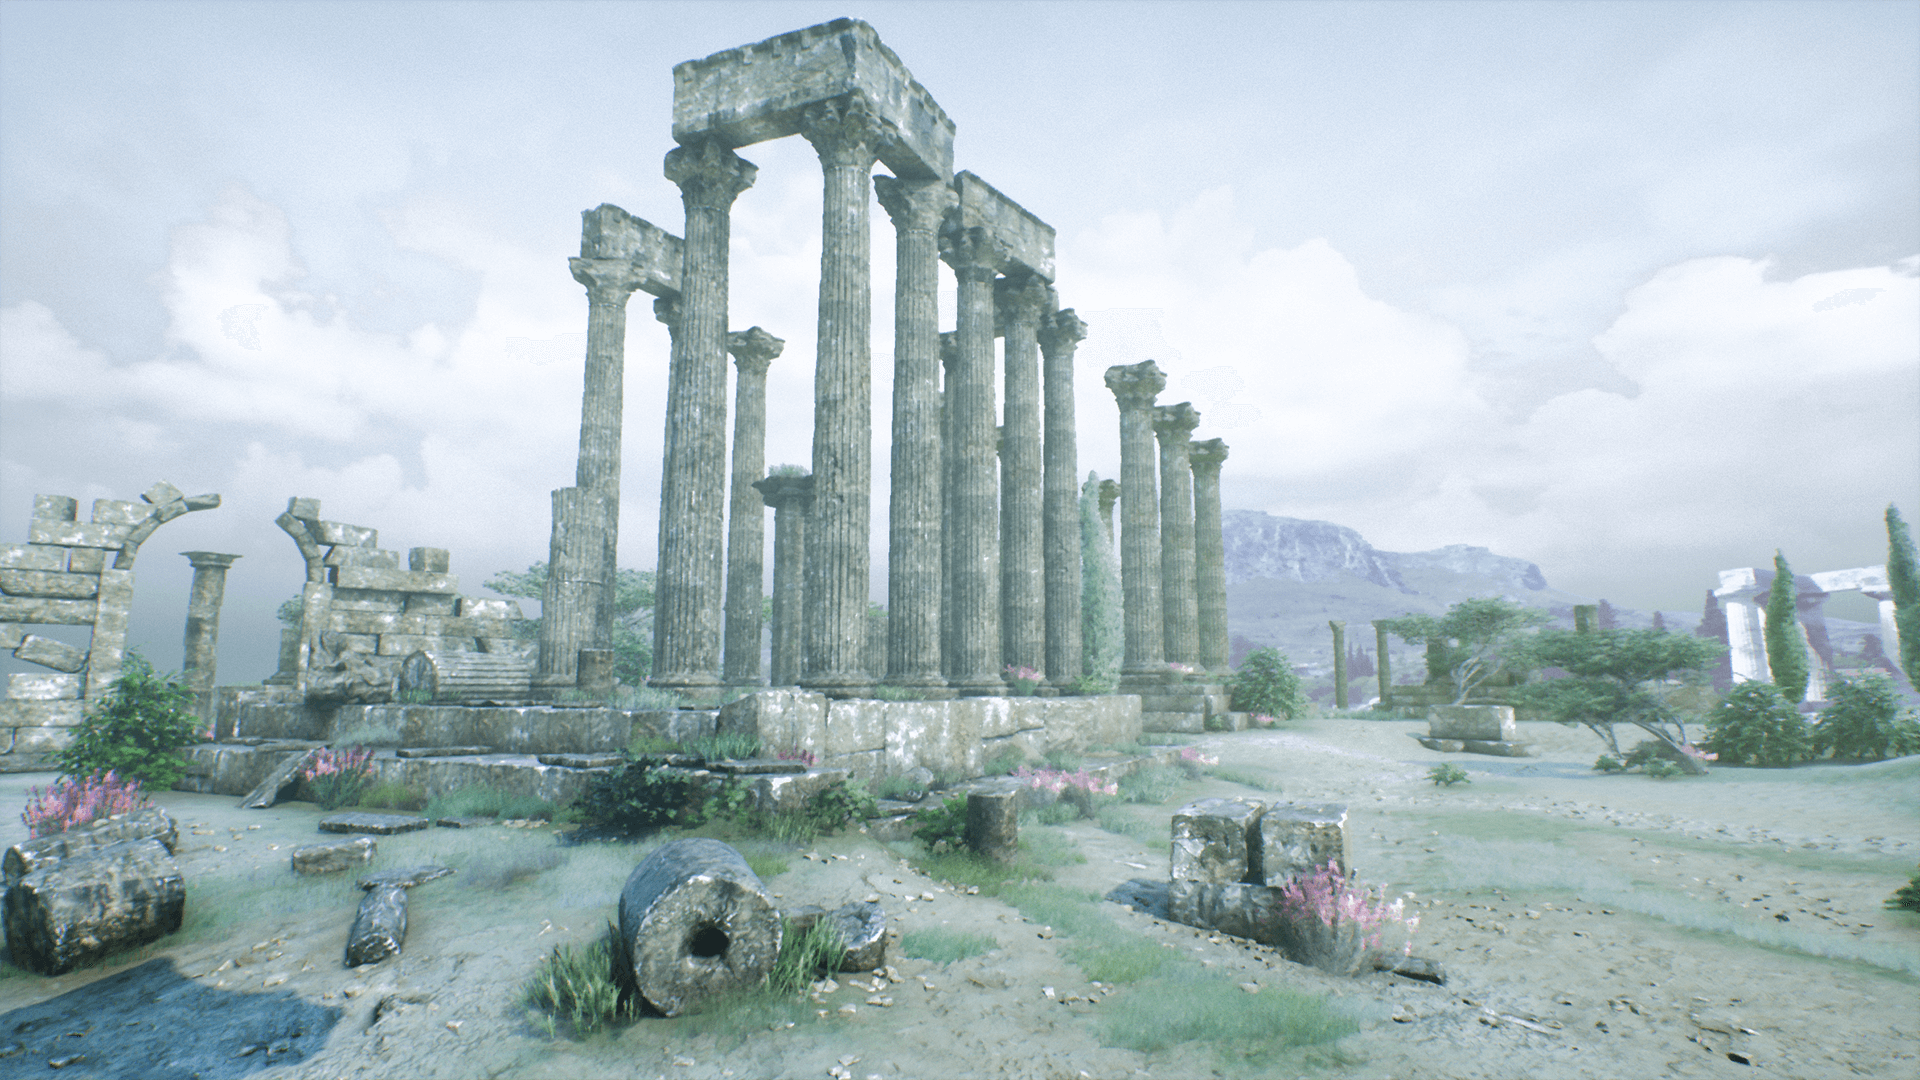 Modular Ancient Ruins by Darchall in Environments - UE4 Marketplace